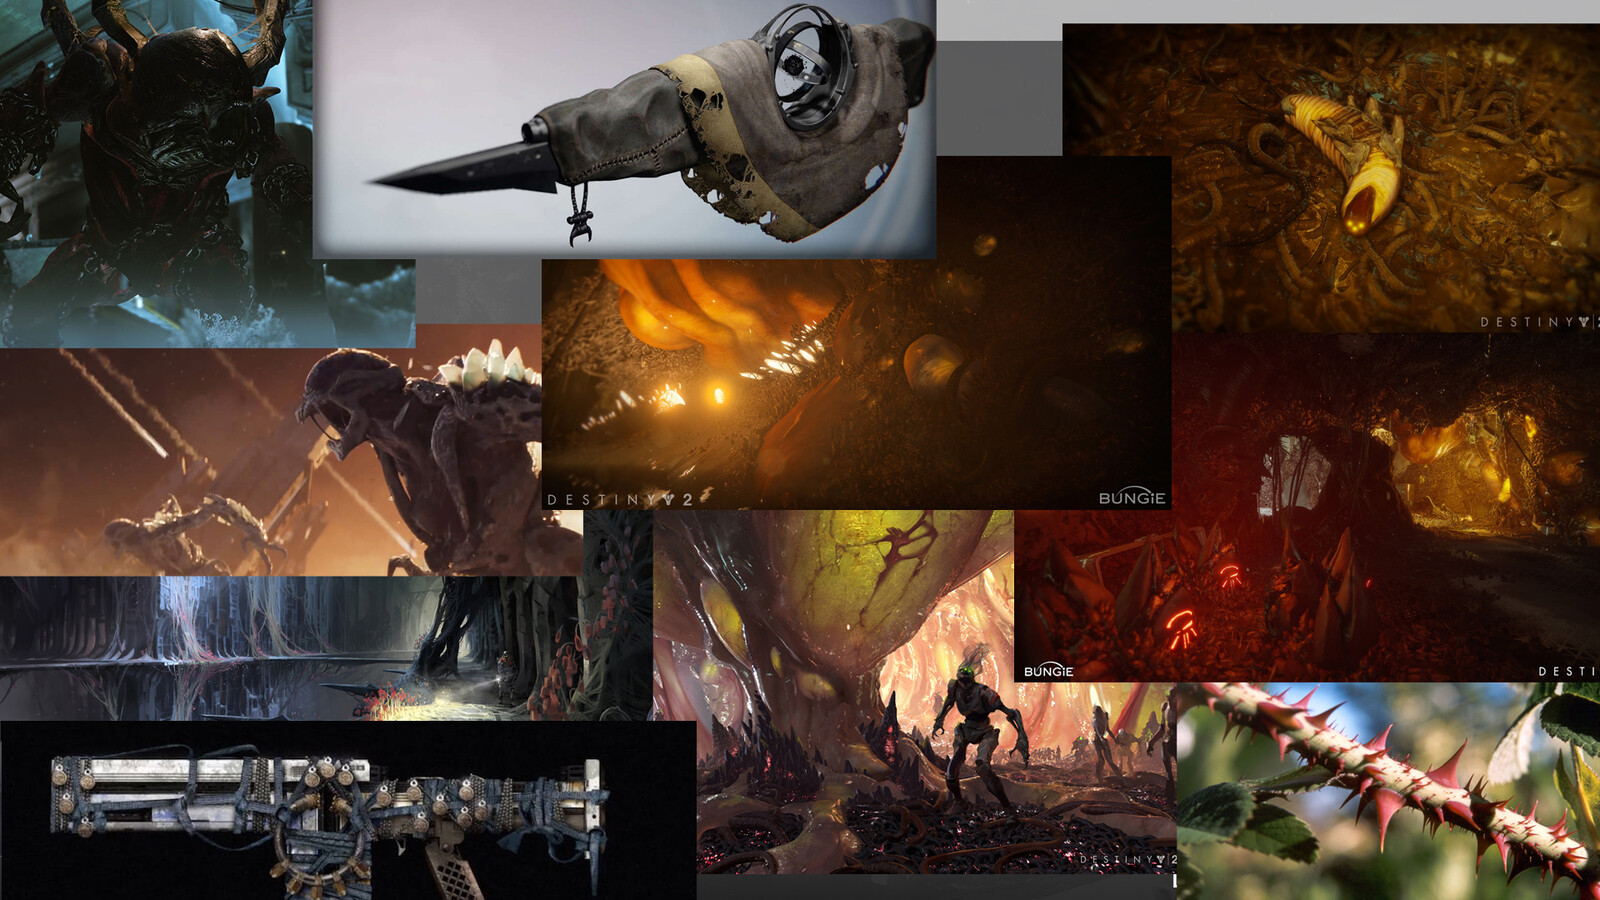 Inspiration Board (Hive inspired). Game concept art and screenshots is content created and owned by Bungie Inc. I've posted them here to showcase my art direction decisions/inspiration for the weapon concept piece I illustrated.